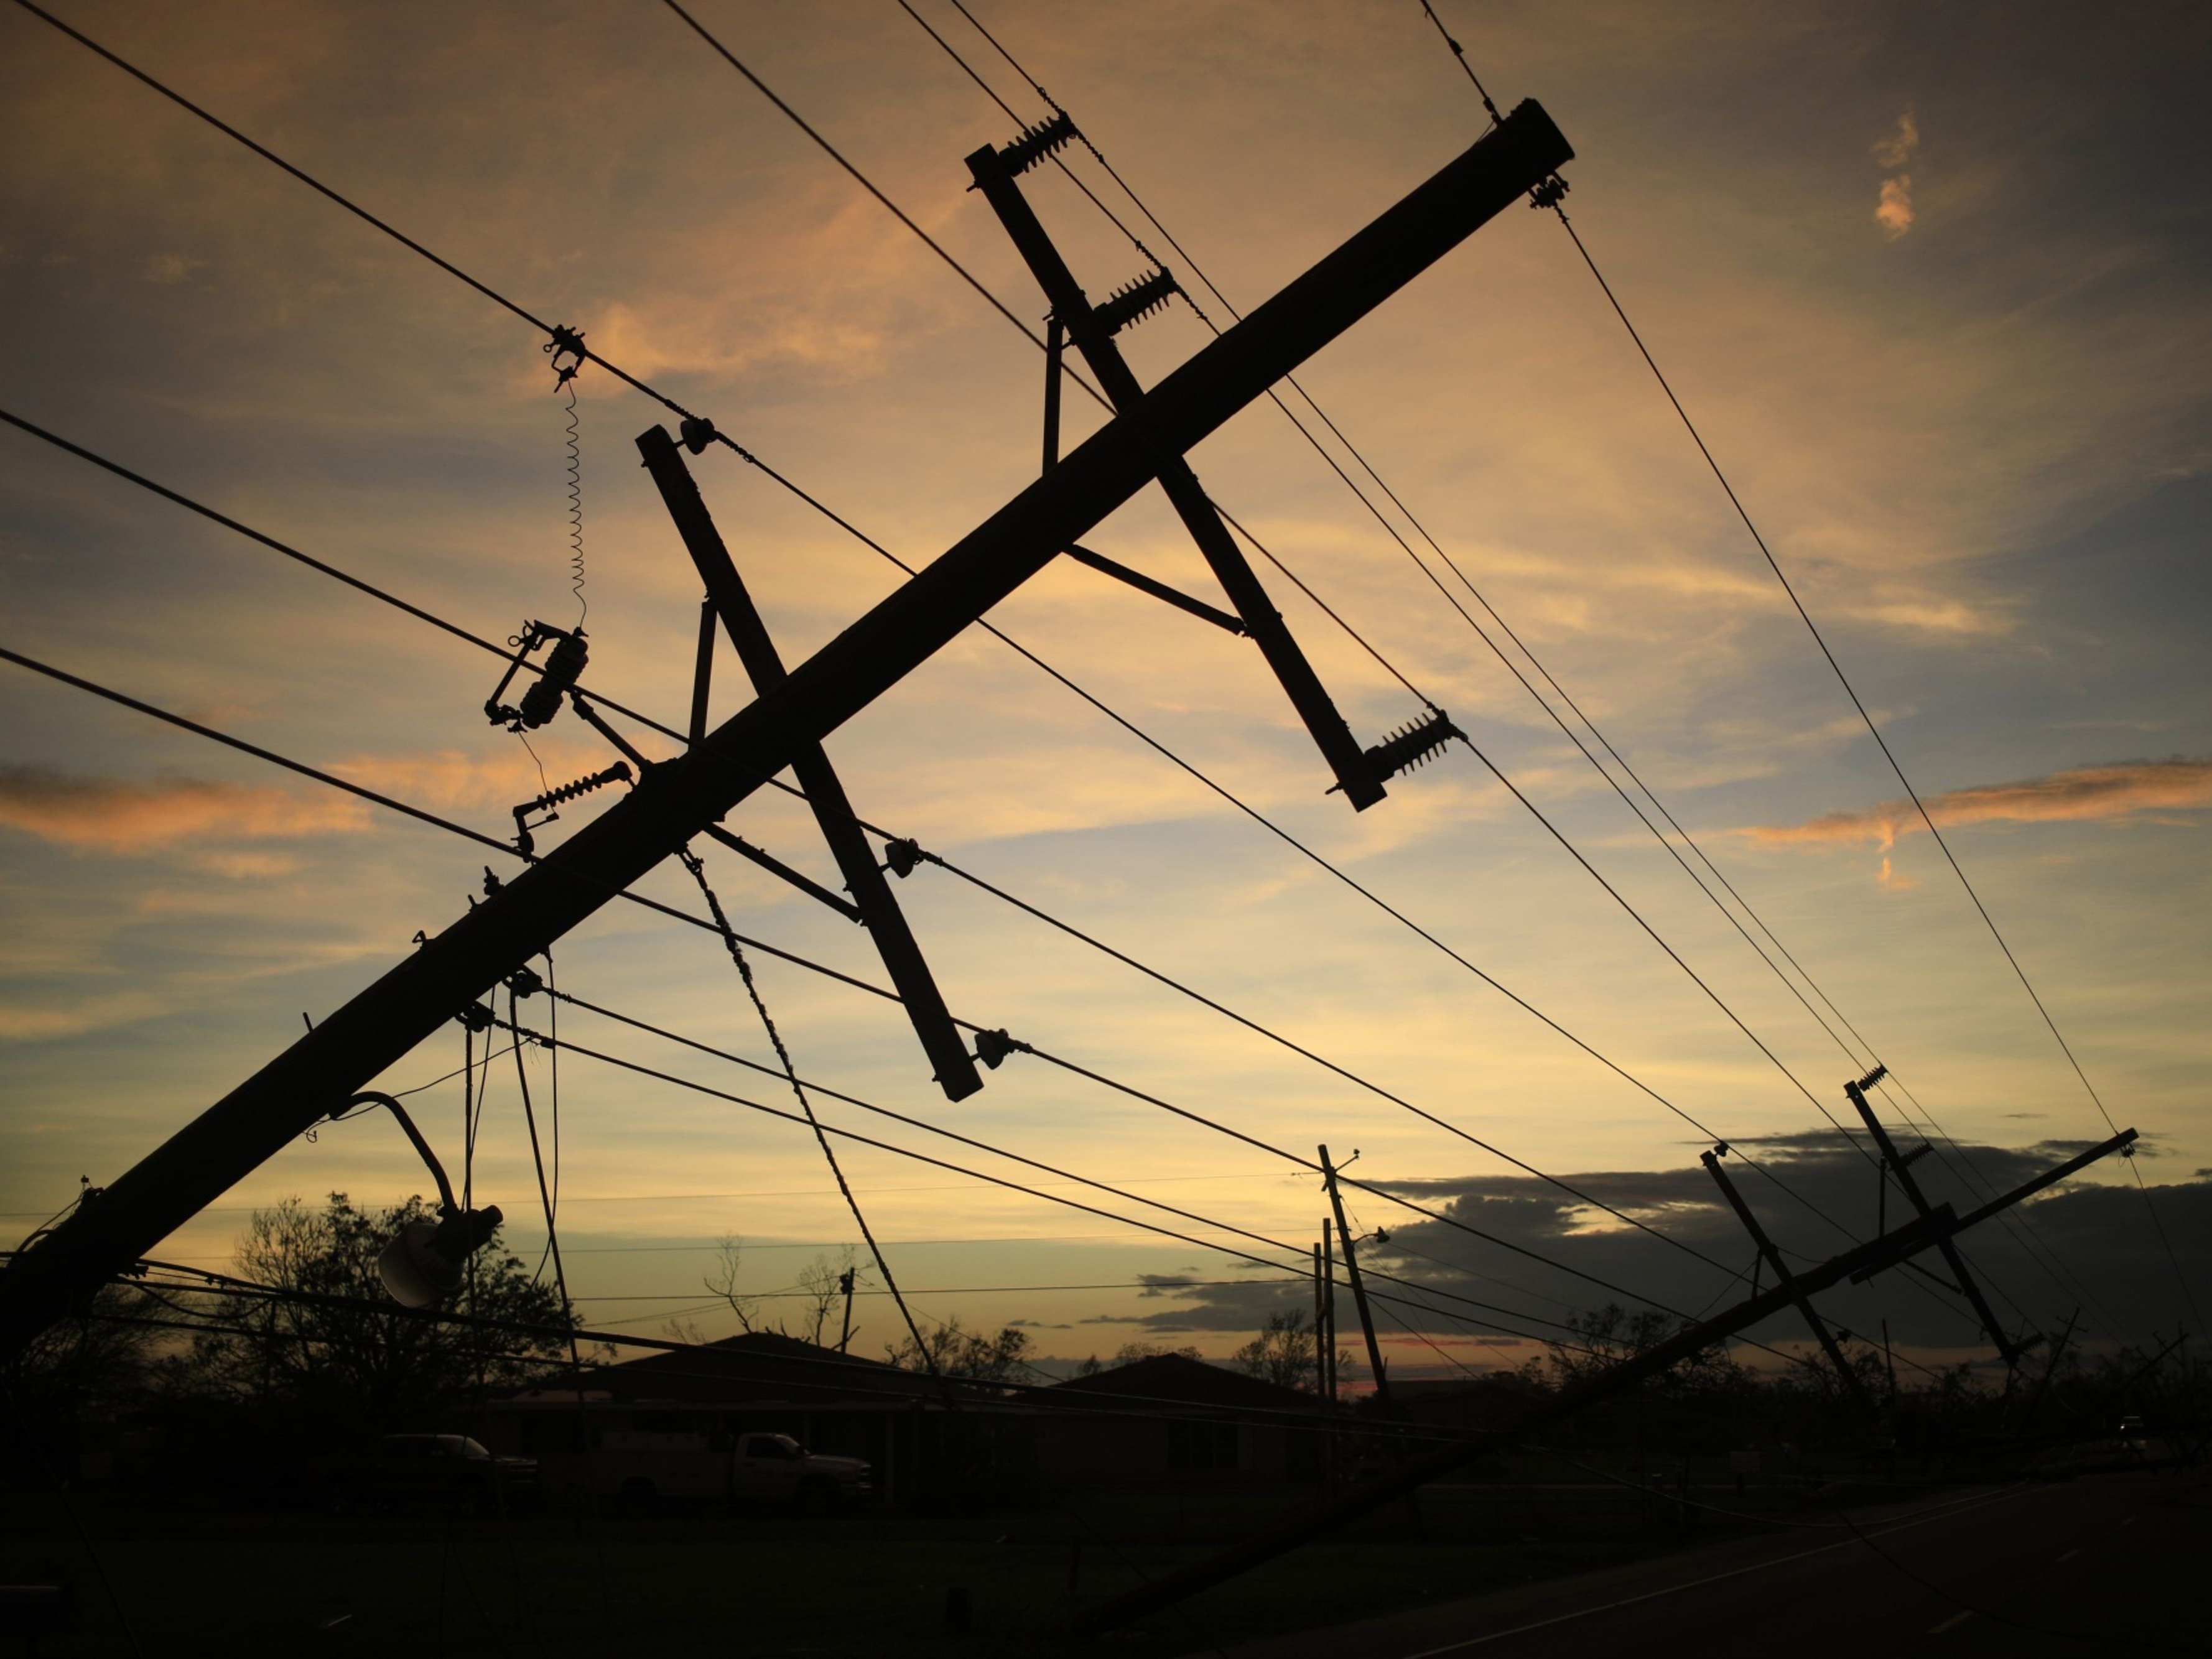 New Orleans Faces Days Without Power as Repair Work Begins | 2021-08-31